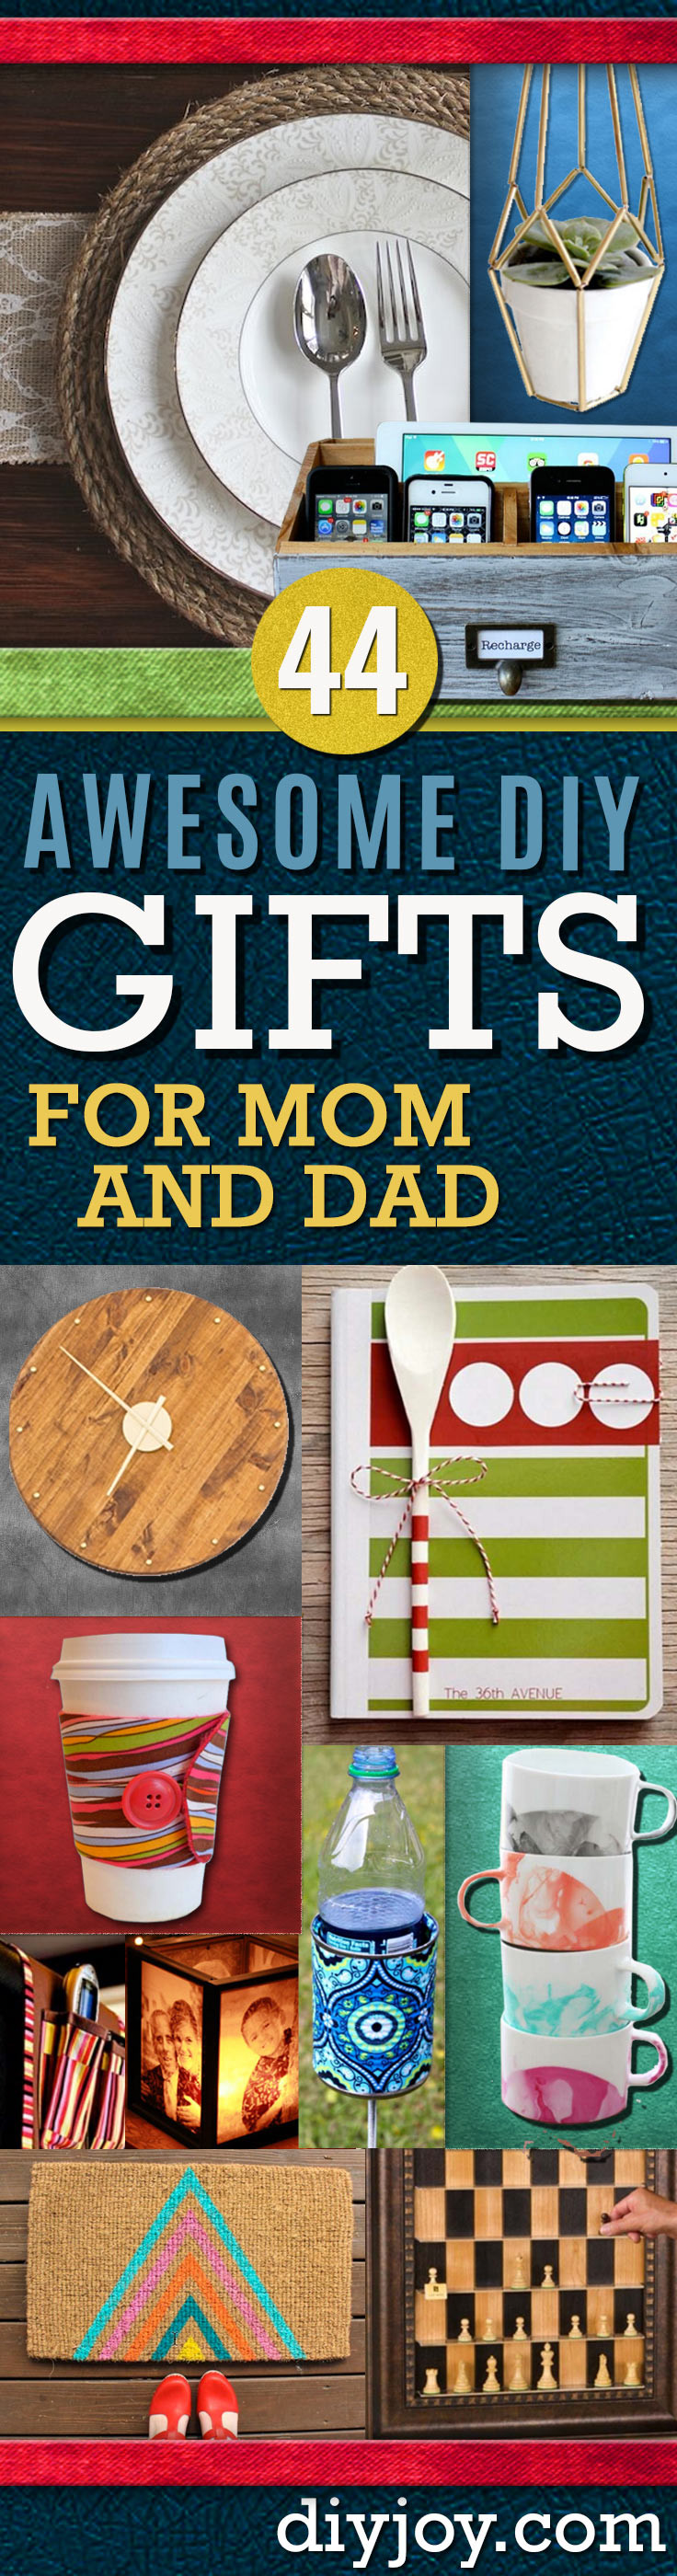 DIY Gift For Dad Christmas
 Awesome DIY Gift Ideas Mom and Dad Will Love